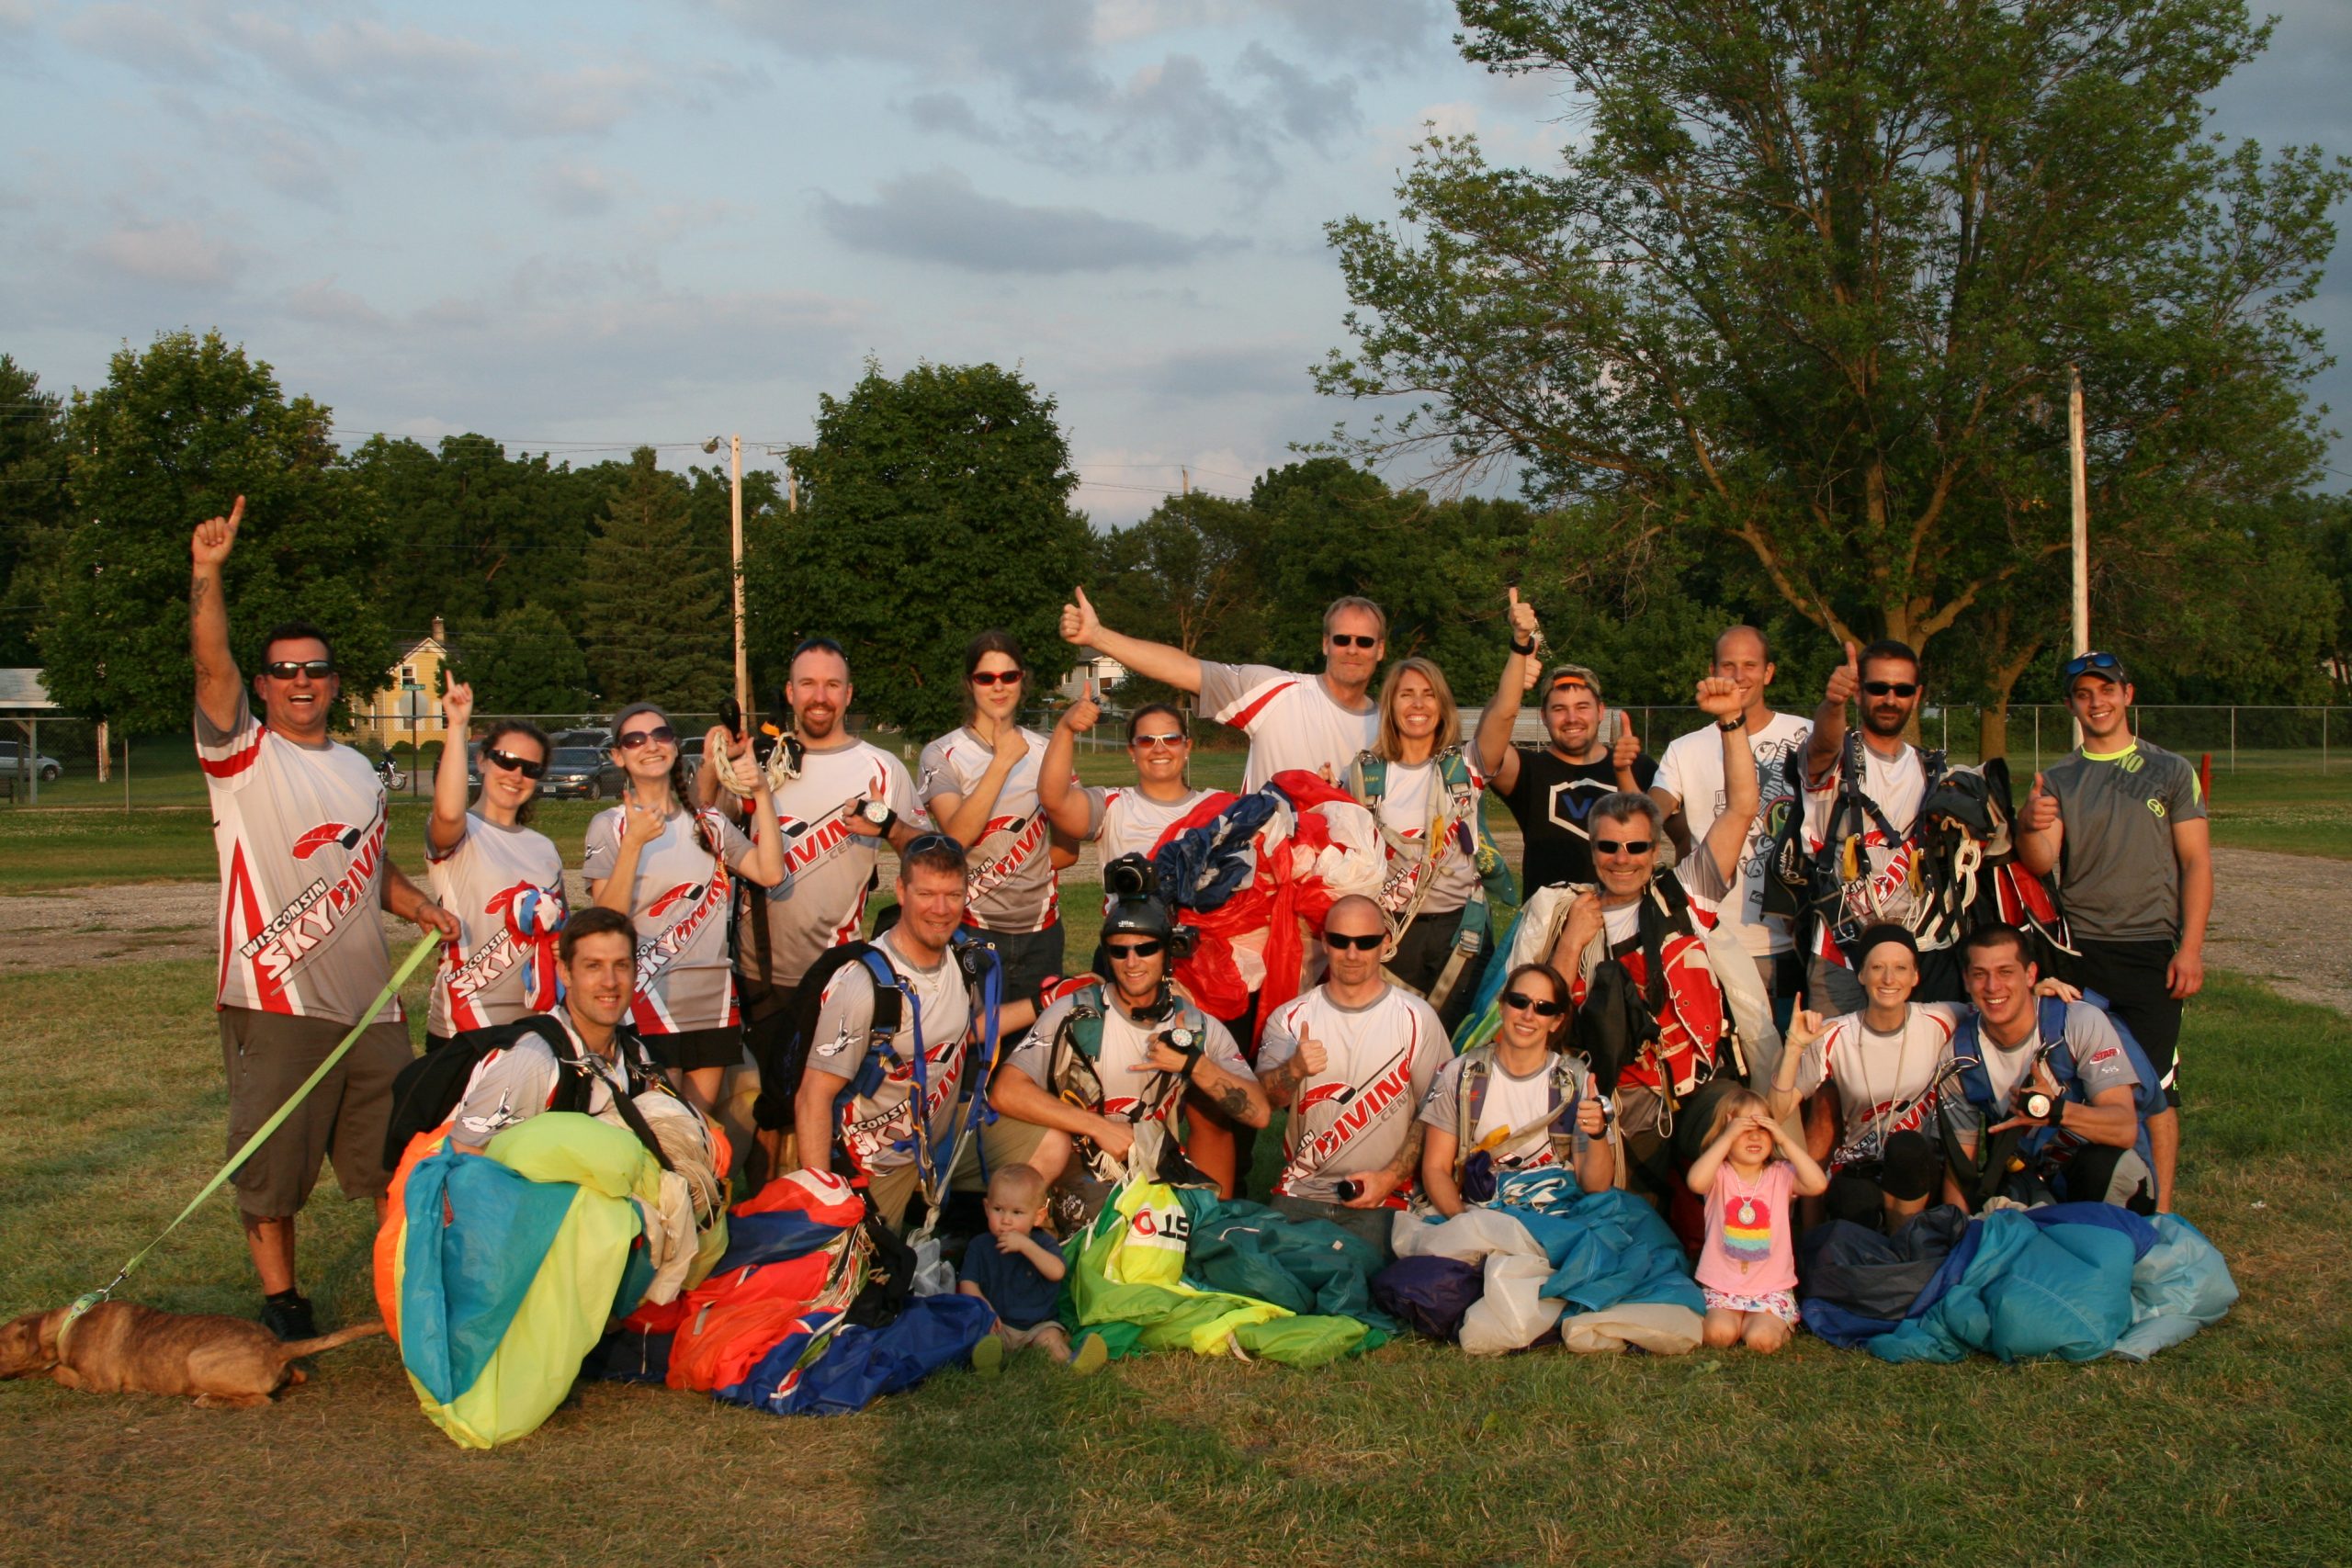 The best skydiving in the Midwest – A group shot of the staff at Wisconsin Skydiving Center near Milwaukee, WI